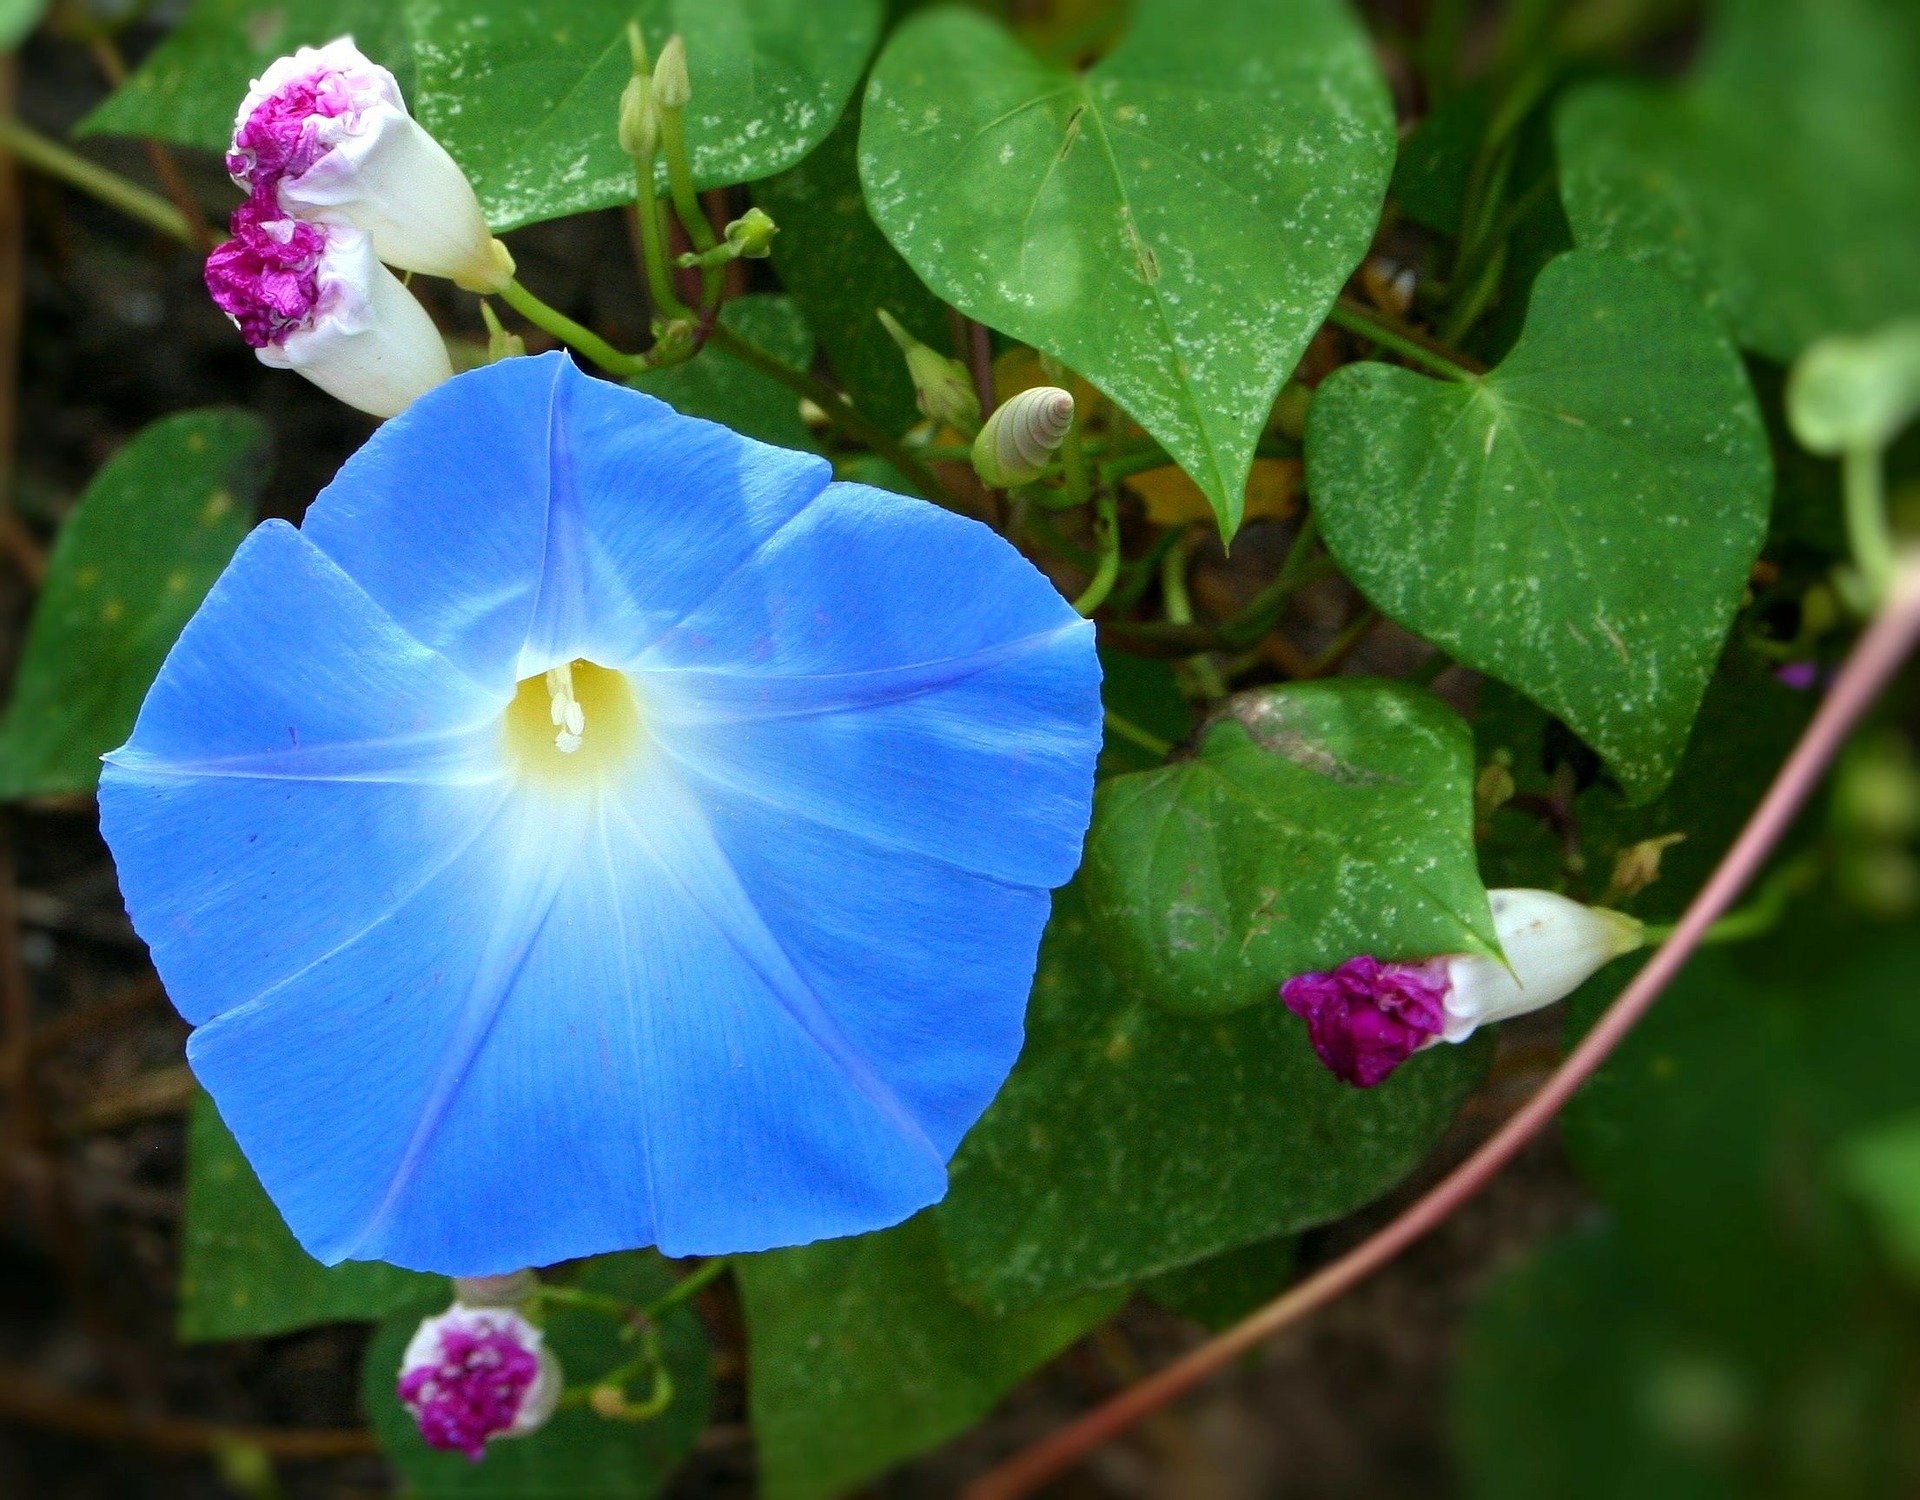 A blue morning glory blossom with white star throat and yellow center